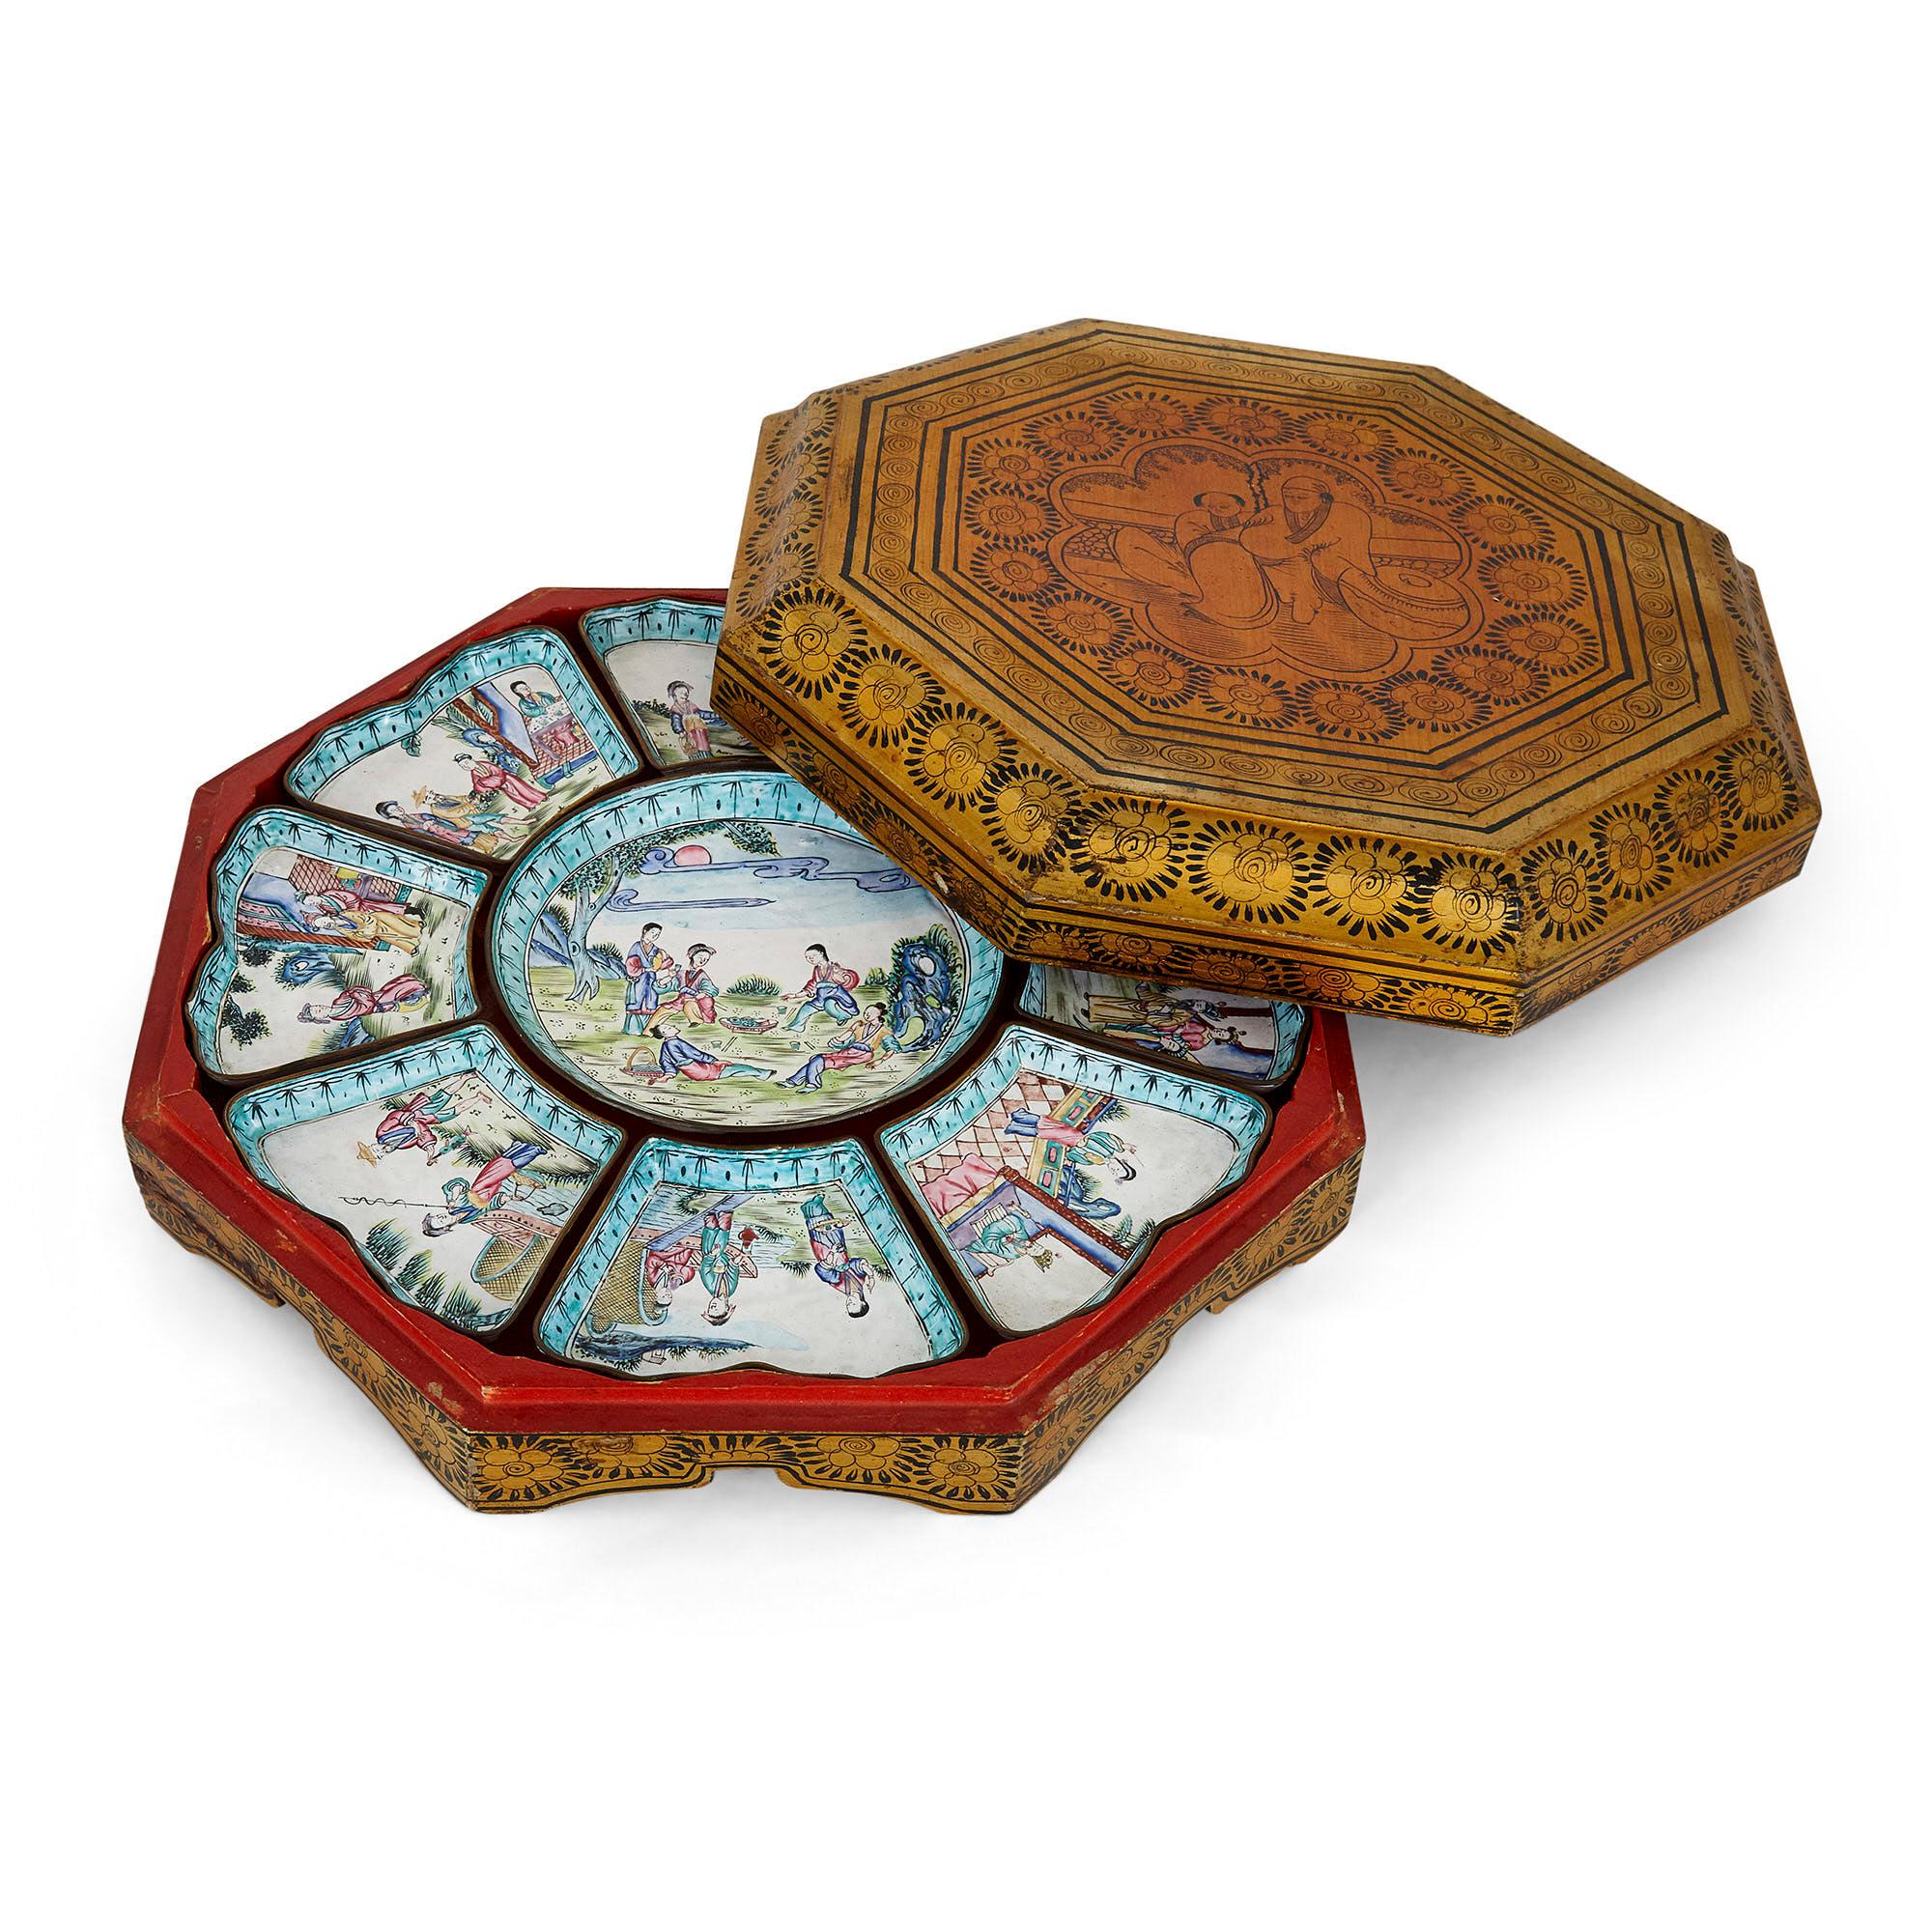 Set of Chinese enamel dishes in lacquered box
Chinese, early 20th century
Measures: Central dish: Height 2cm, diameter 37cm
Box: Height 11cm, width 40.5cm, depth 40.5cm

This beautiful set of sweetmeat dishes is crafted from Cantonese enamel.